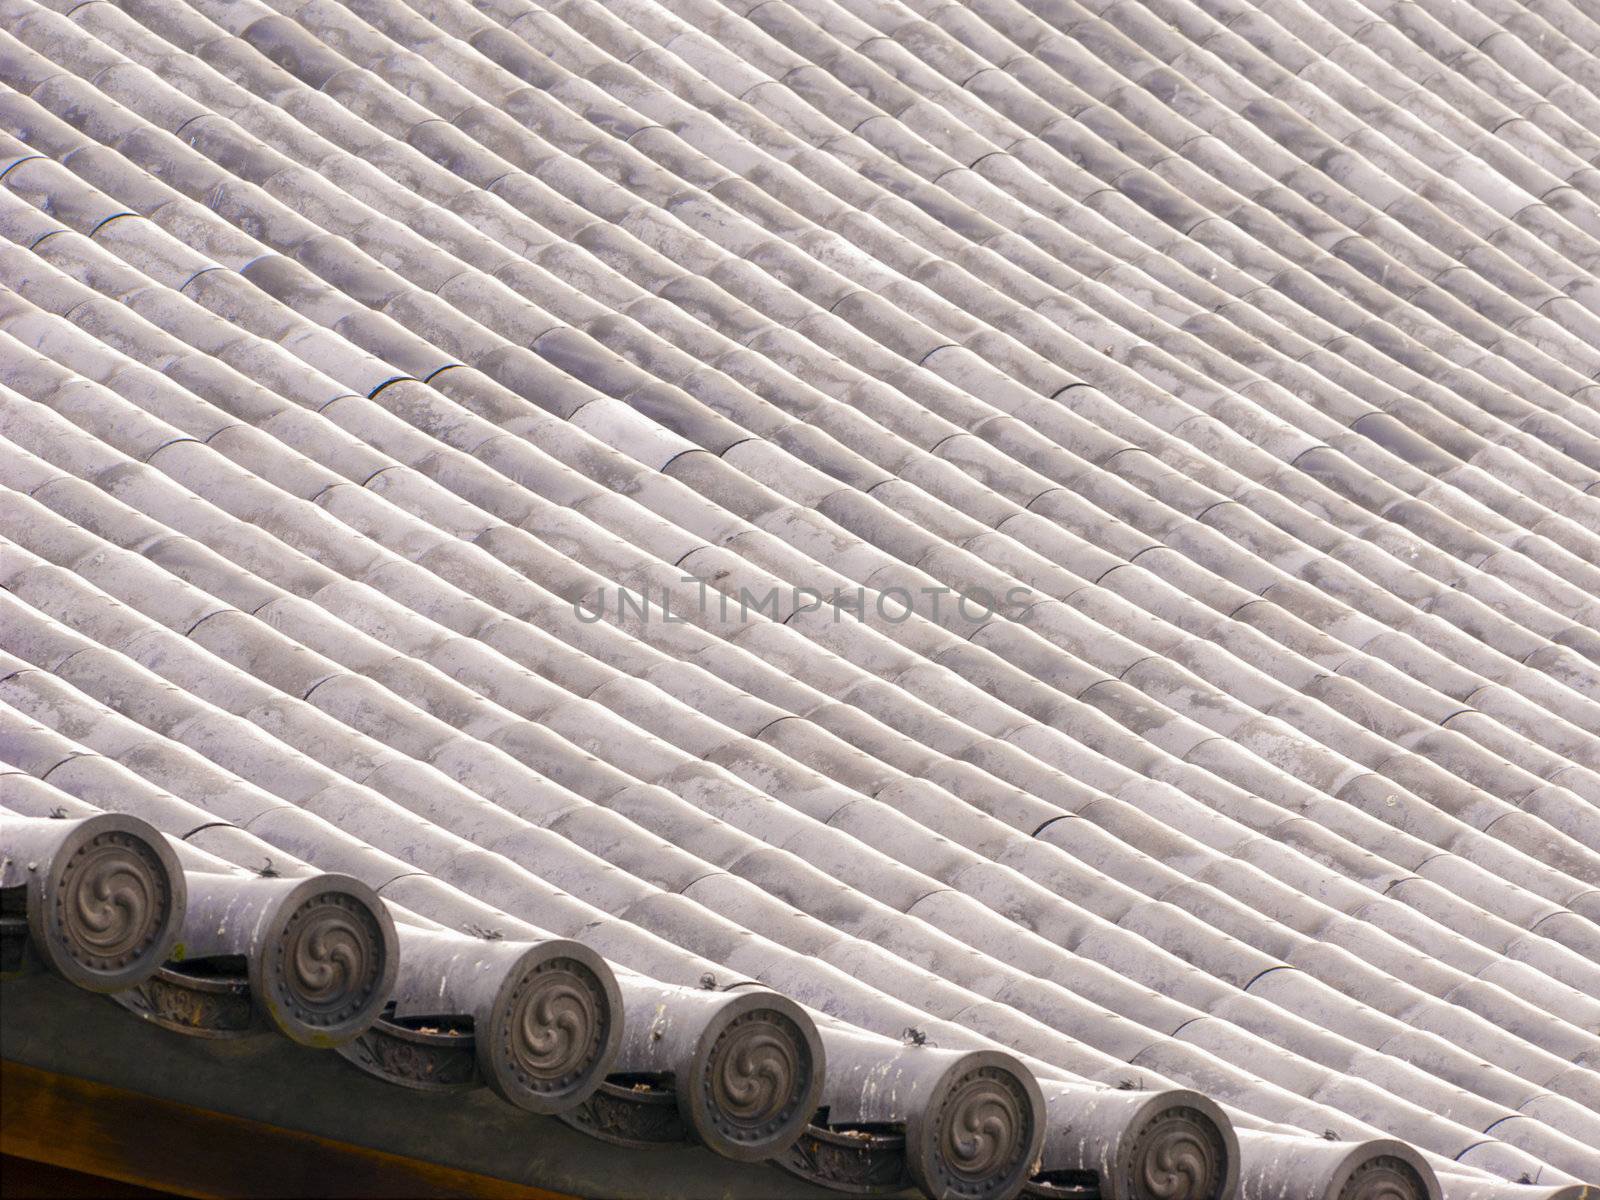 repeatable background pattern of Japanese Temple Roof, Higashi Honganji Temple in Kyoto, Japan